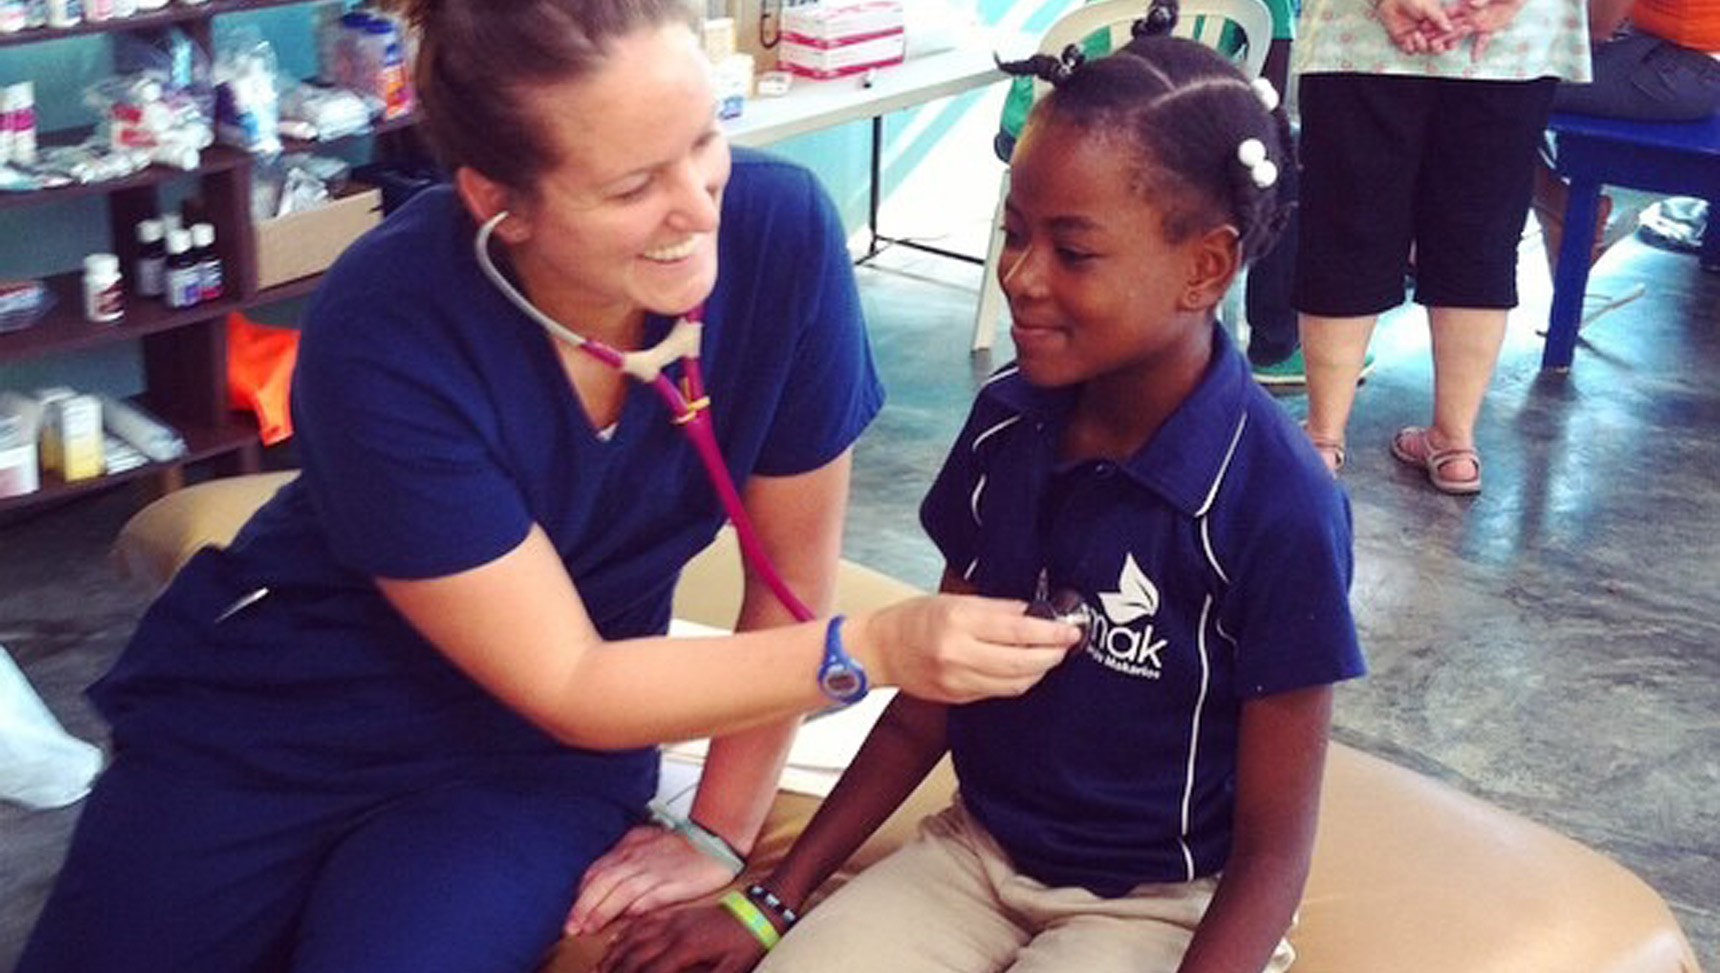 Jessica Wohl, Physican Assistant Student, worked a rotation abroad in the Dominican Republic.